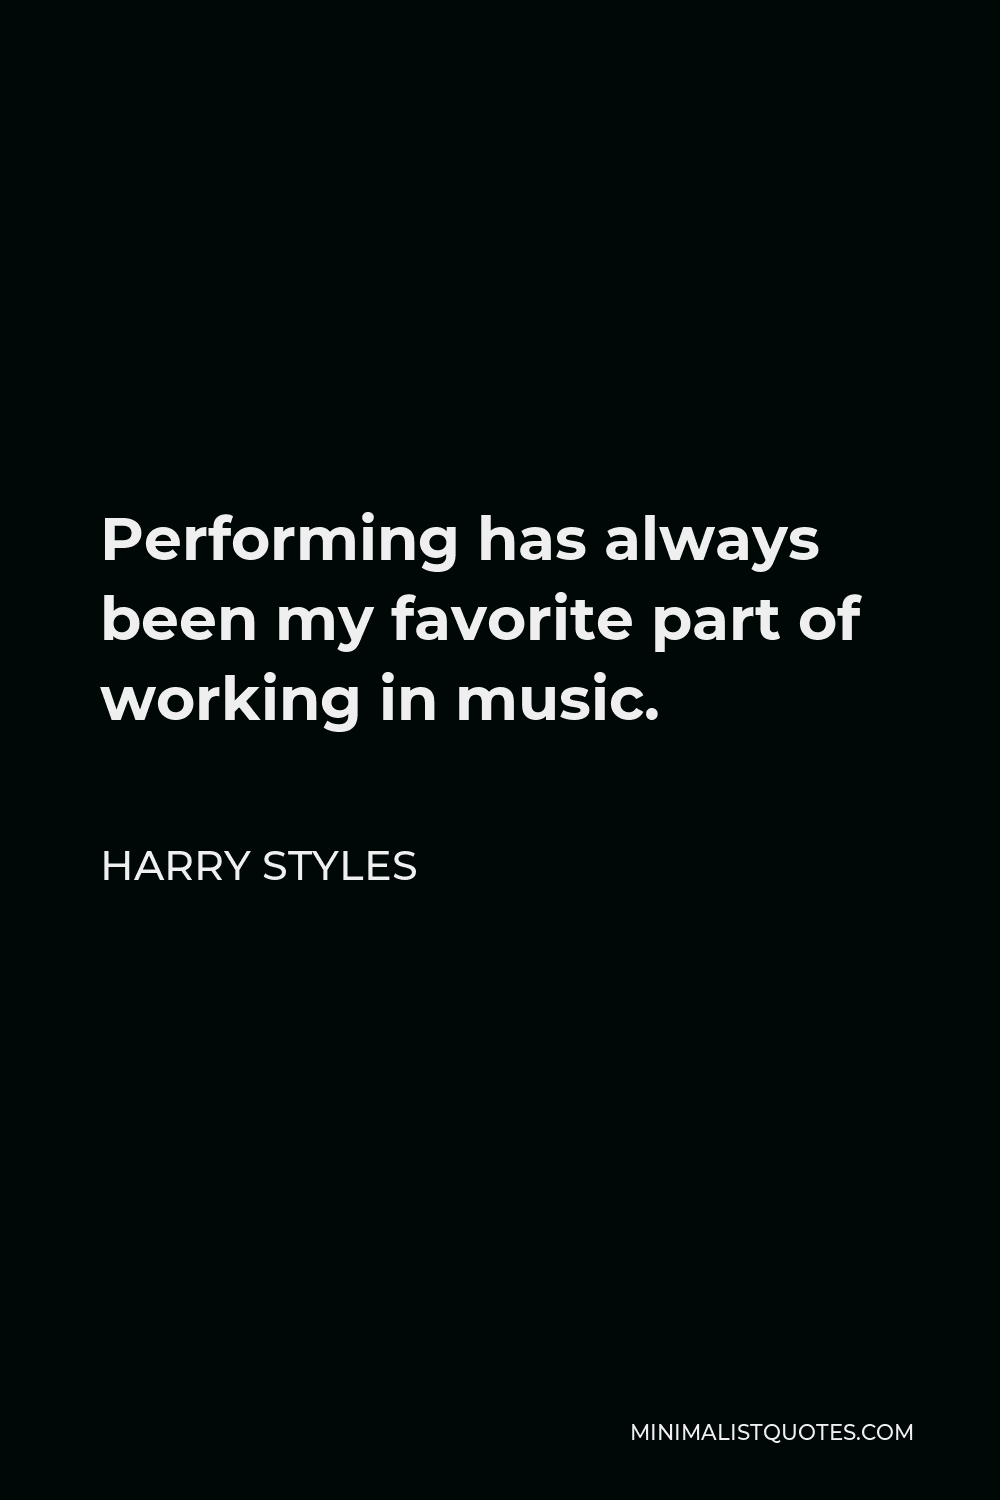 Harry Styles Quote - Performing has always been my favorite part of working in music.